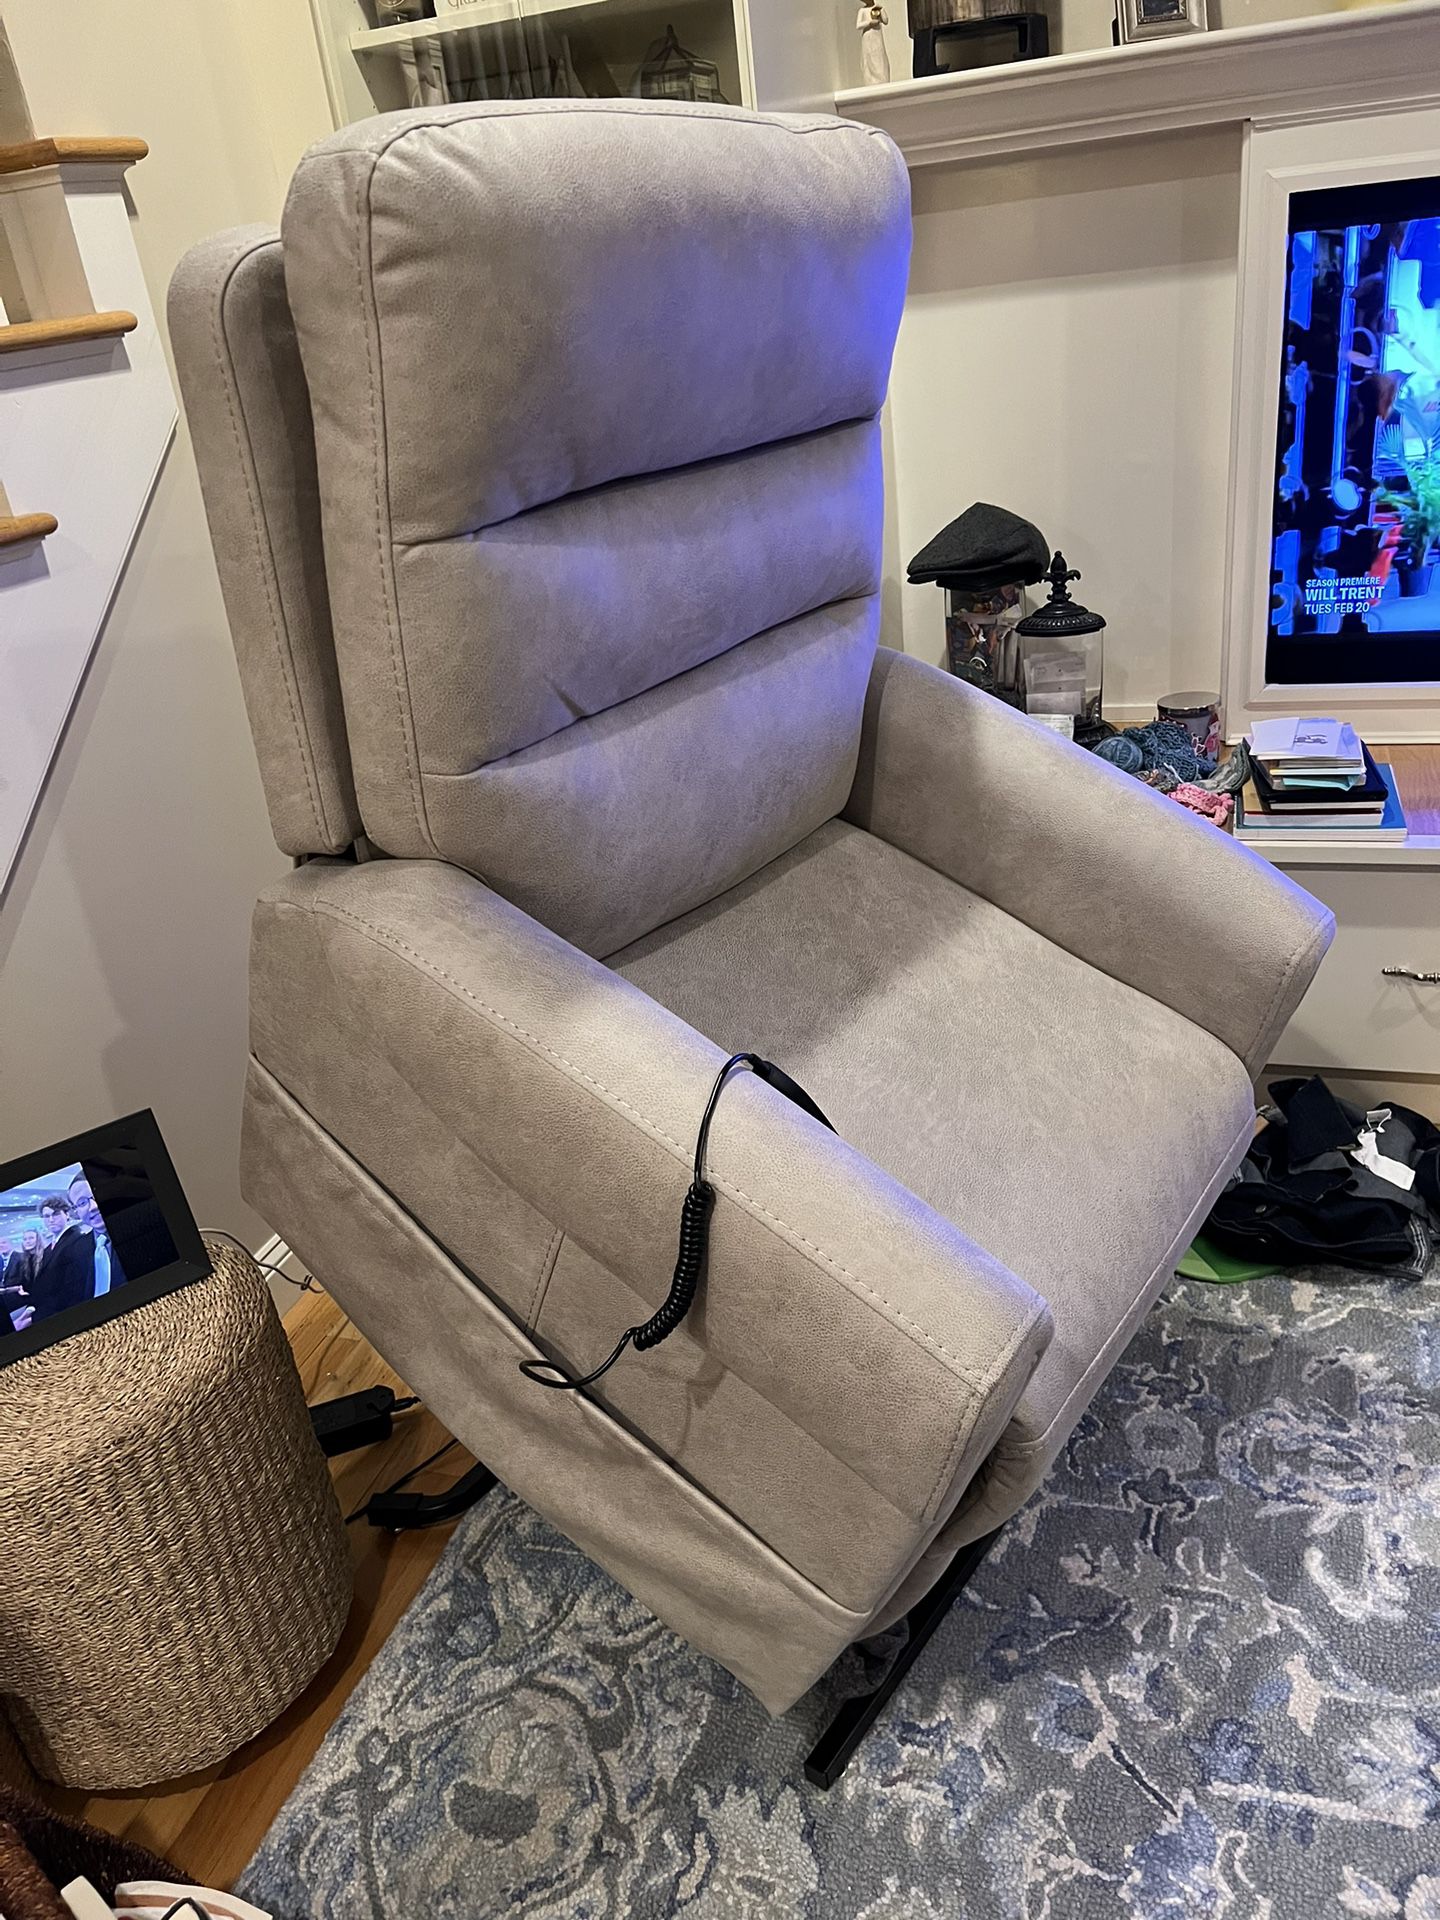 Electric Recliner / Lift Chair - Like NEW